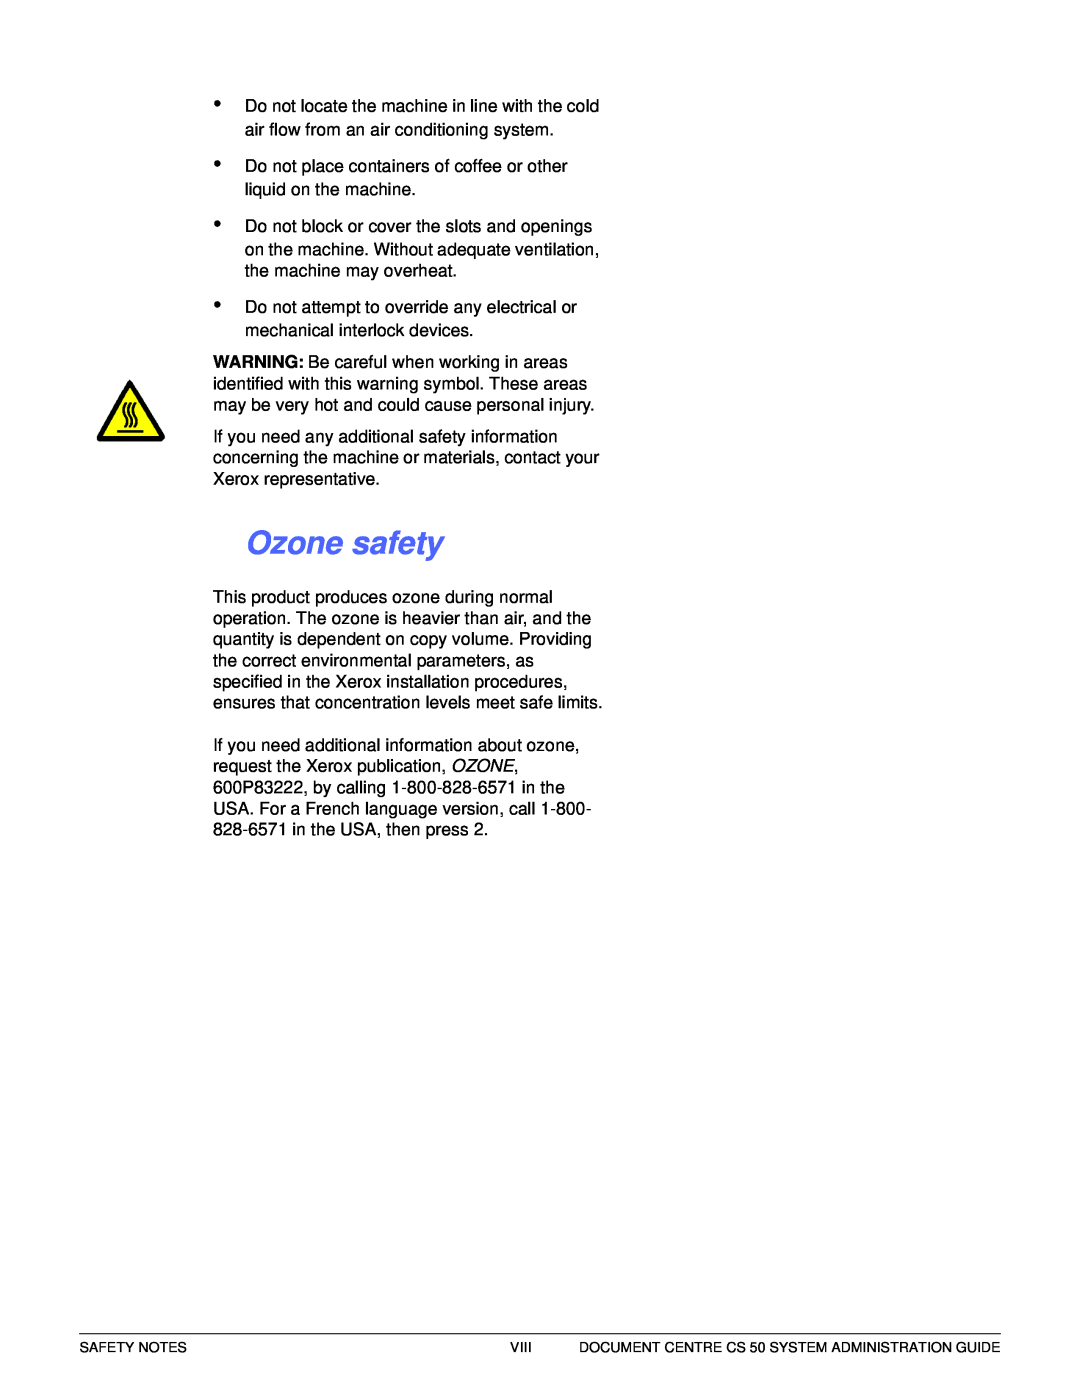 Xerox manual Ozone safety, 1 2 3 4 5 6 7, Safety Notes, Viii, DOCUMENT CENTRE CS 50 SYSTEM ADMINISTRATION GUIDE 